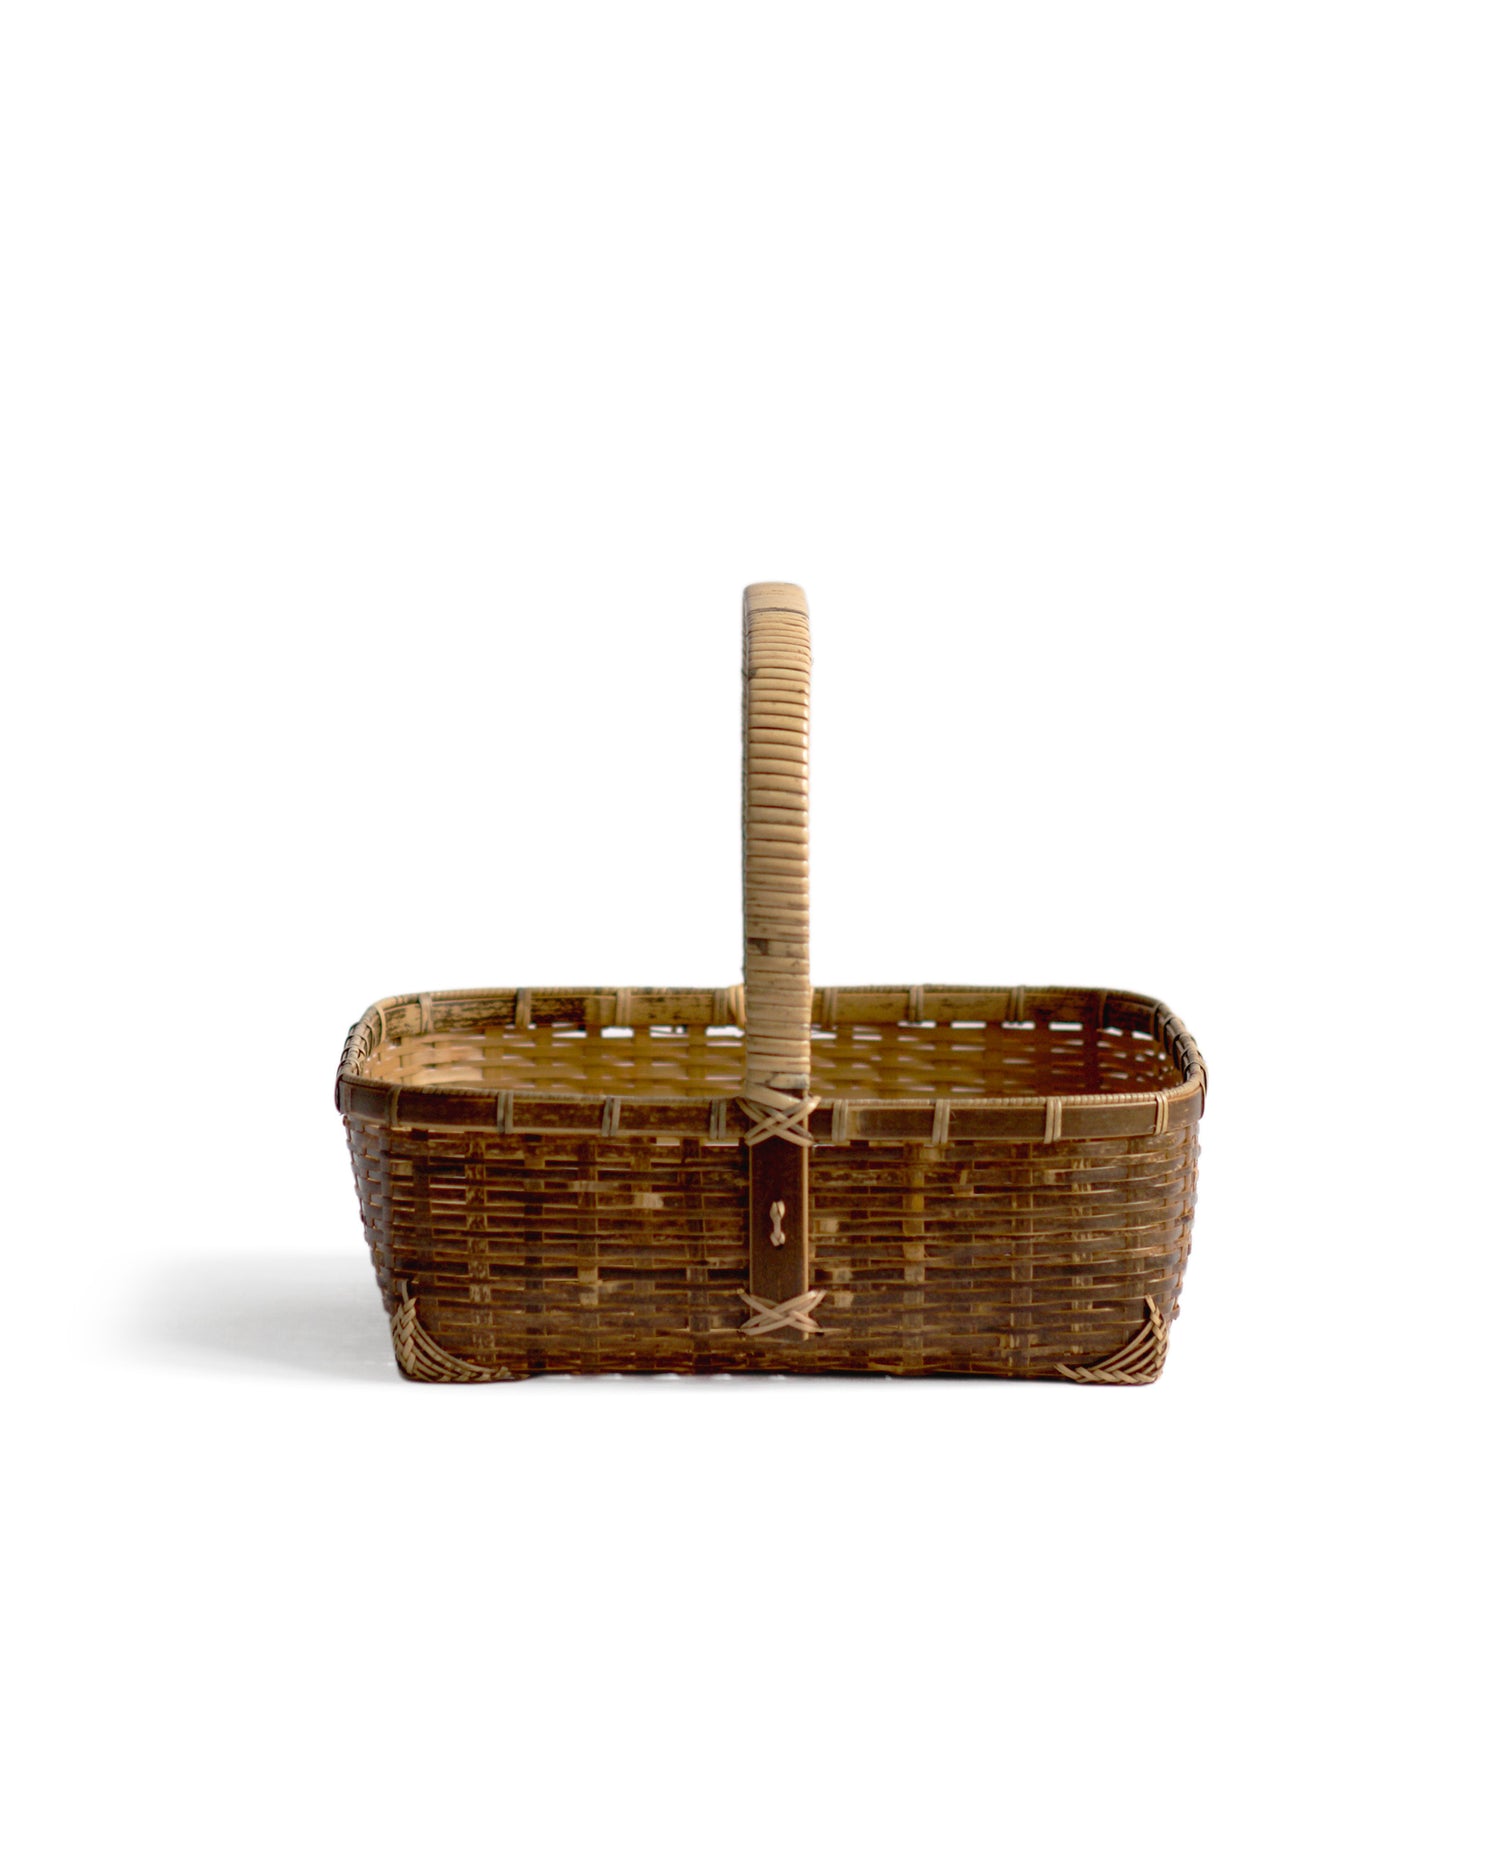 Silhouetted side image facing handle of square toradake bread basket with handle by Kohchosai Kosuga against white background.